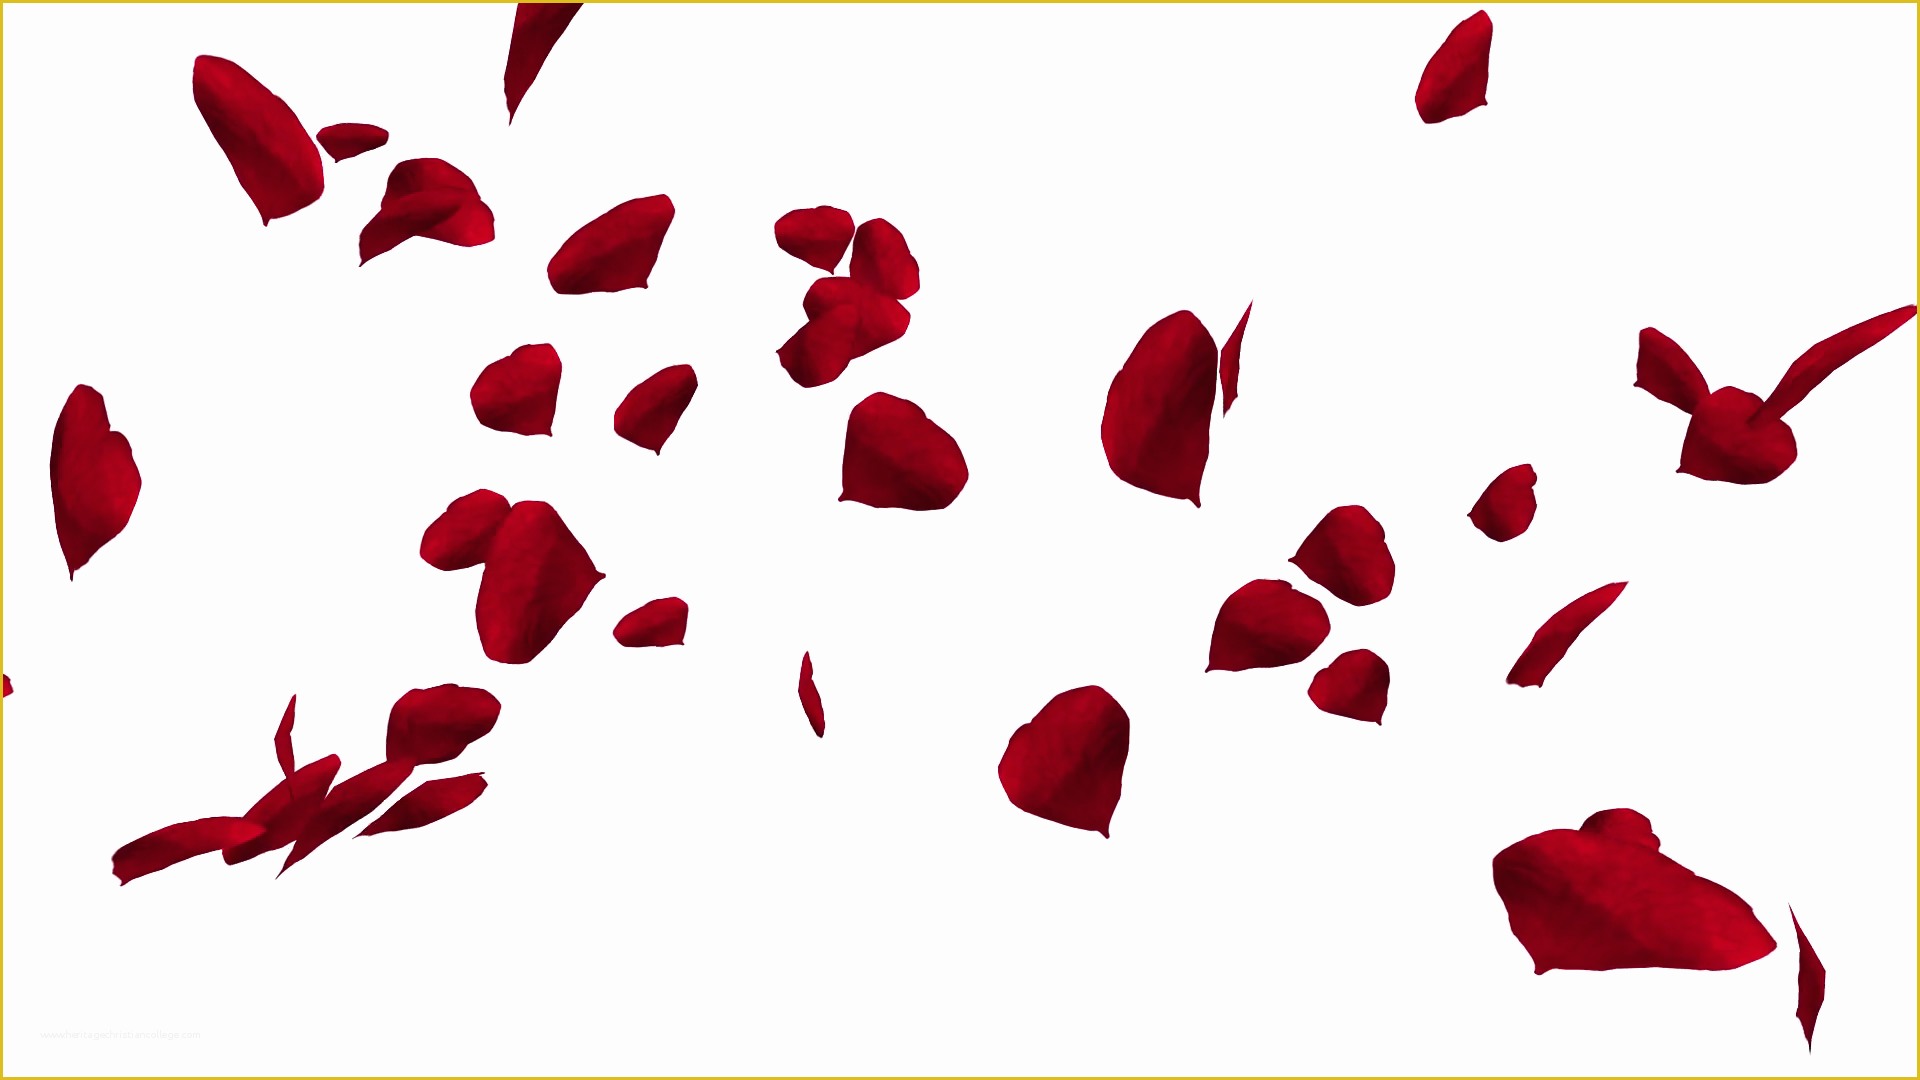 Falling Flower Petals after Effects Template Free Of Falling and Swirling Red Rose Petals Over White Background